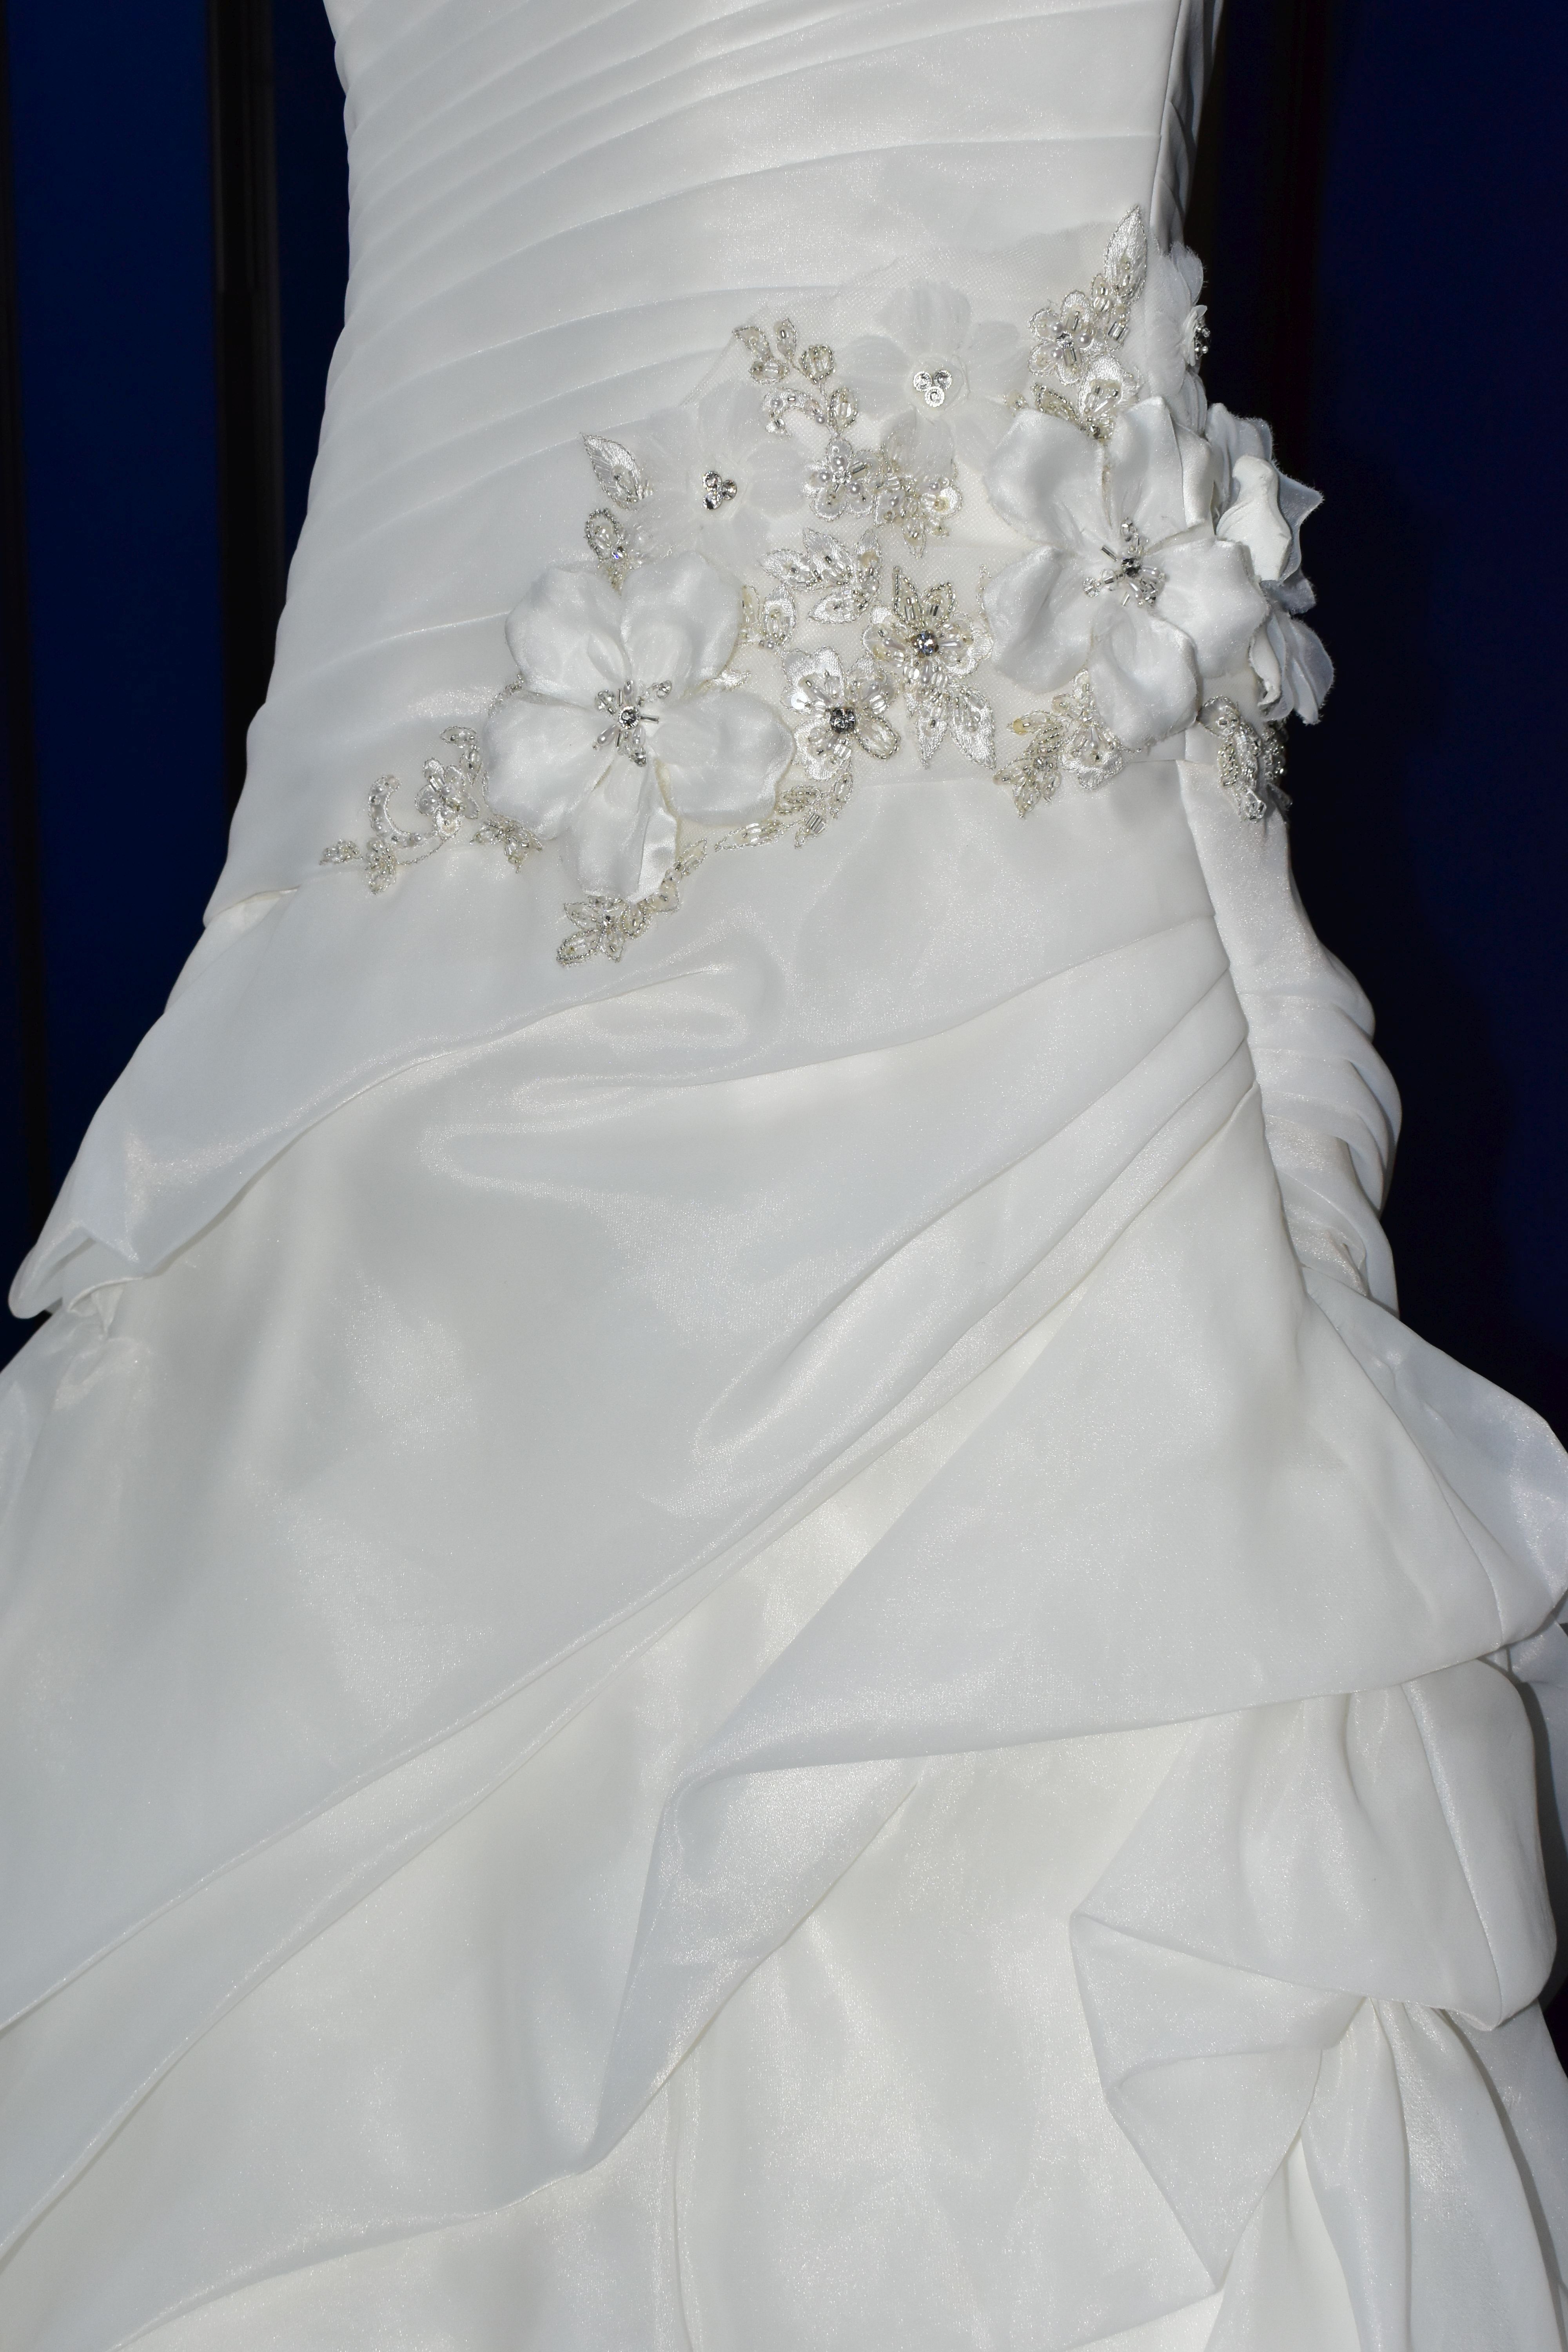 WEDDING GOWN, 'Kenneth Winston' Private Label by G, size 8/10, white pleated bodice, halter neck, - Image 7 of 17